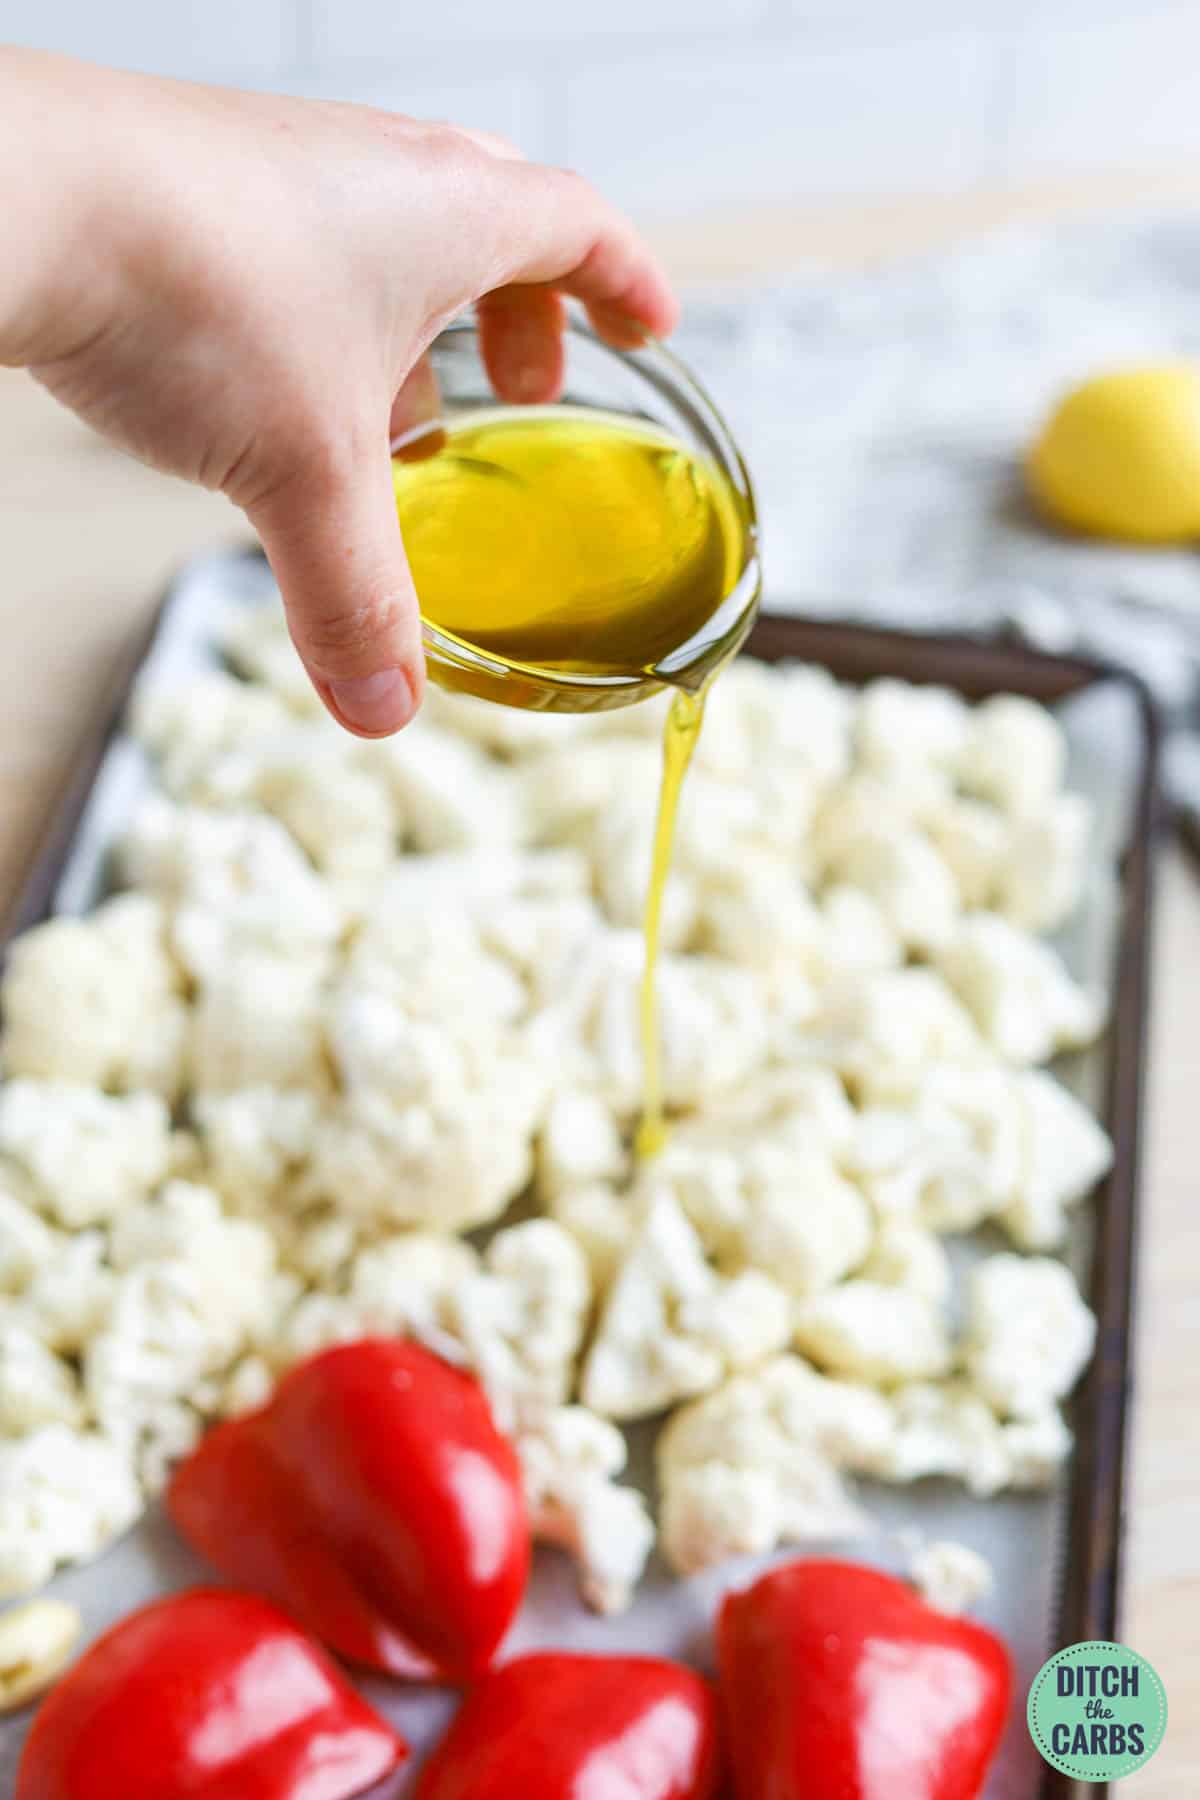 Pouring olive oil over the cauliflower and red pepper.